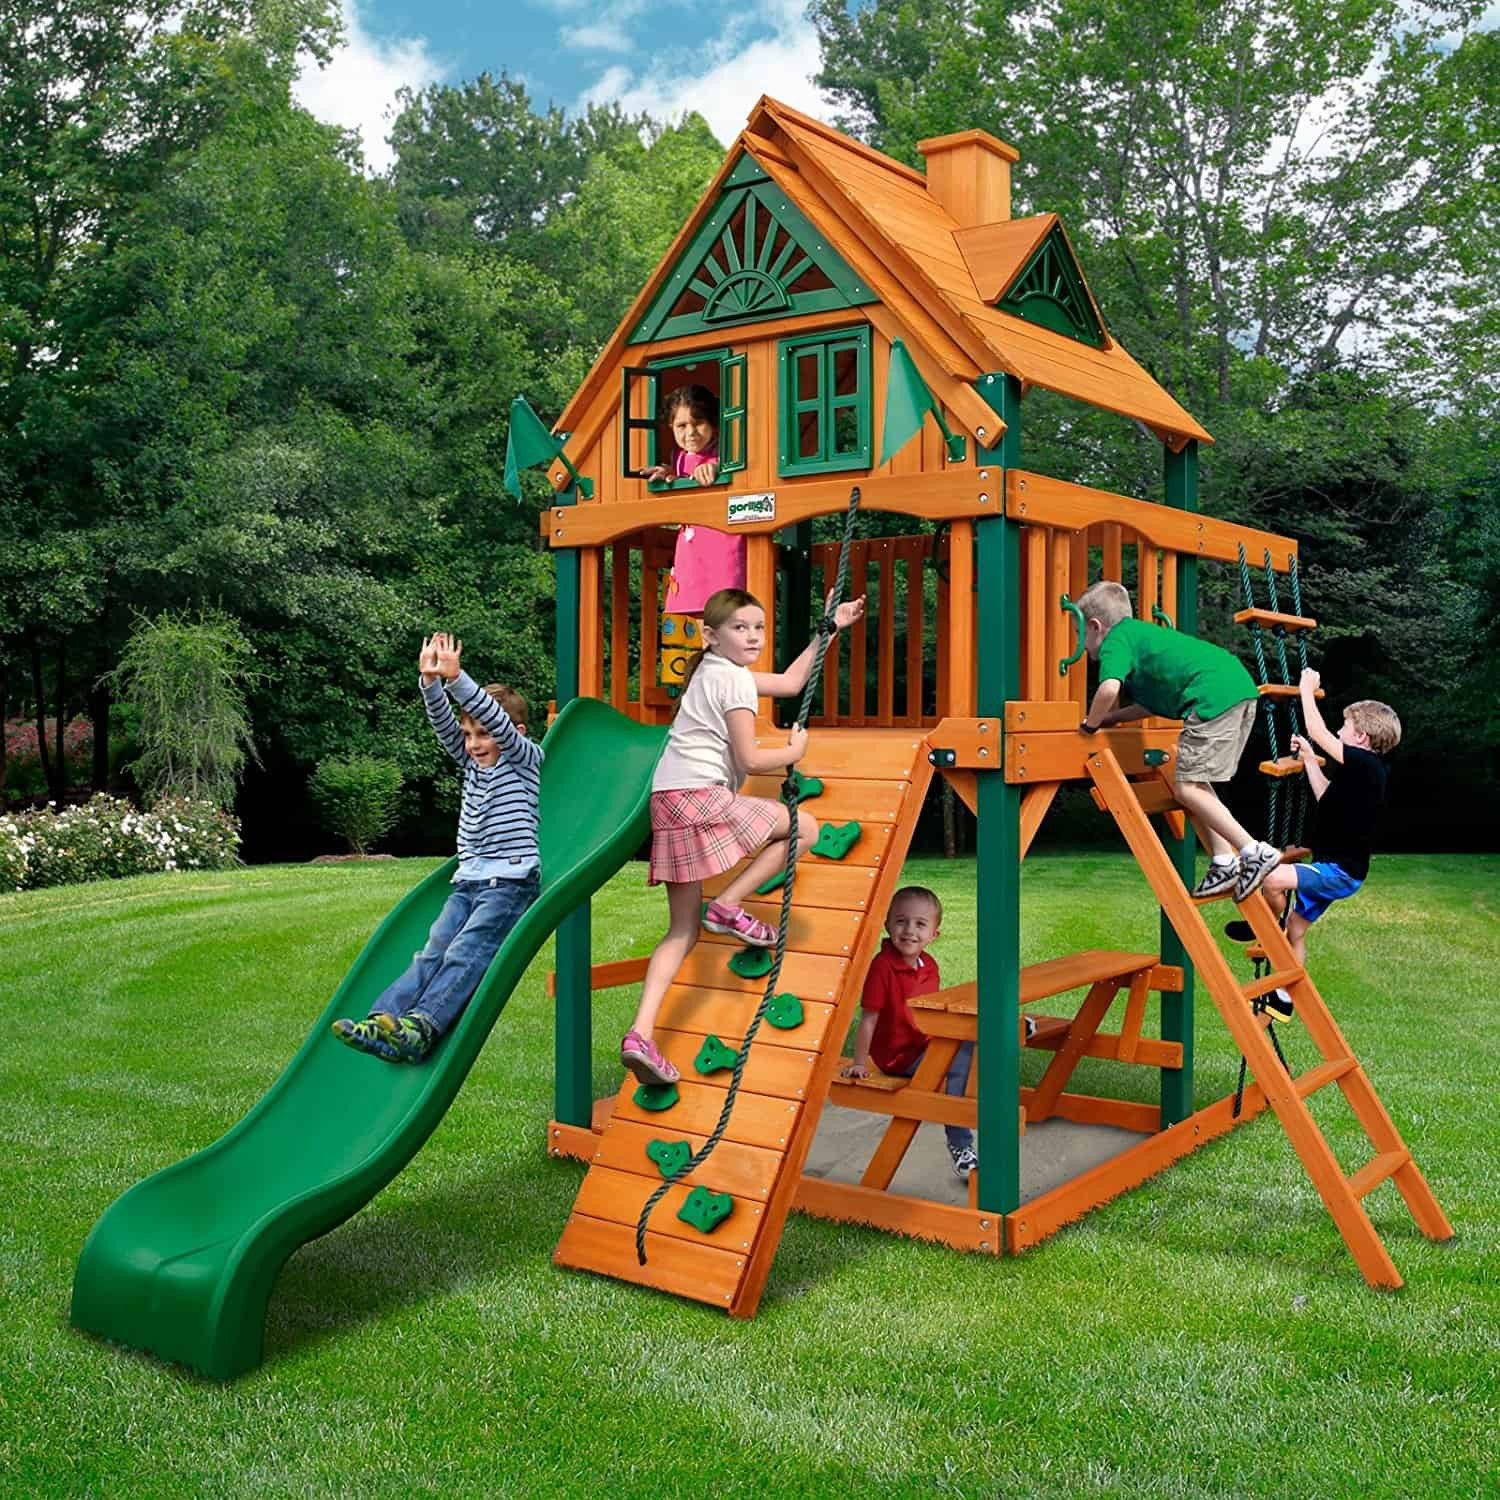 Small Backyard Playground Sets
 Swing Sets for Small Yards The Backyard Site